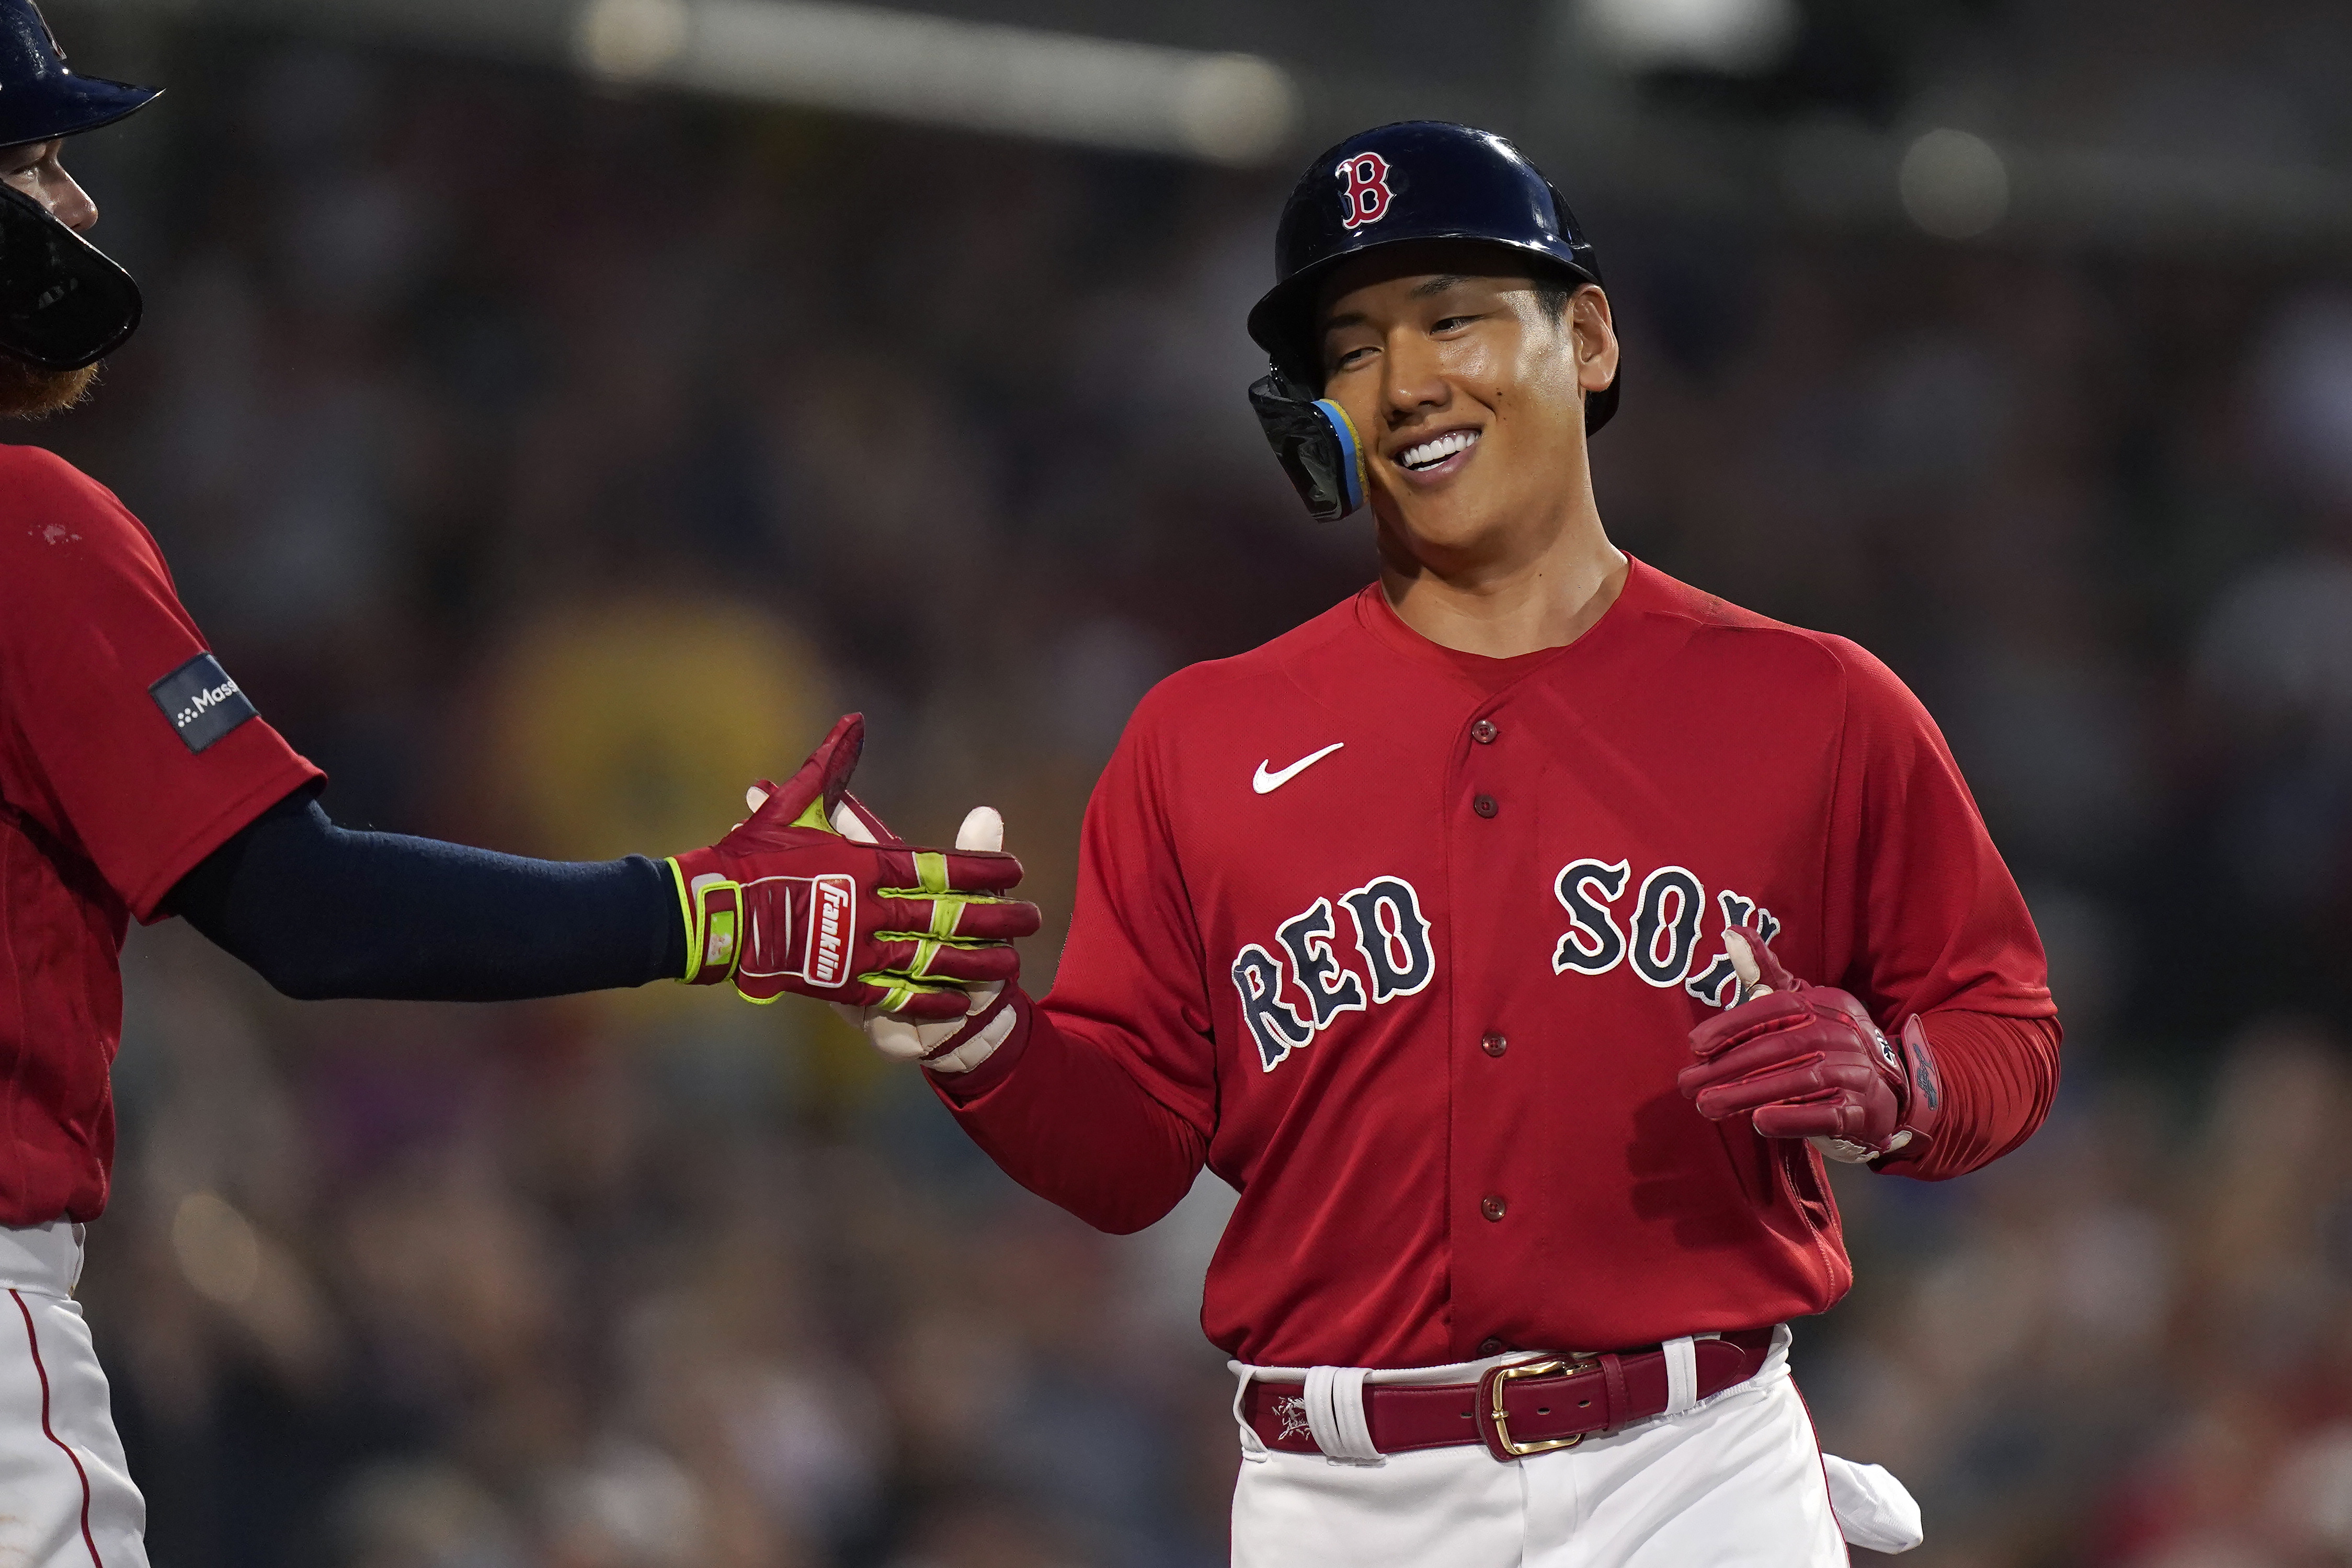 Brayan Bello shuts down Rangers to help the Red Sox win 4-2